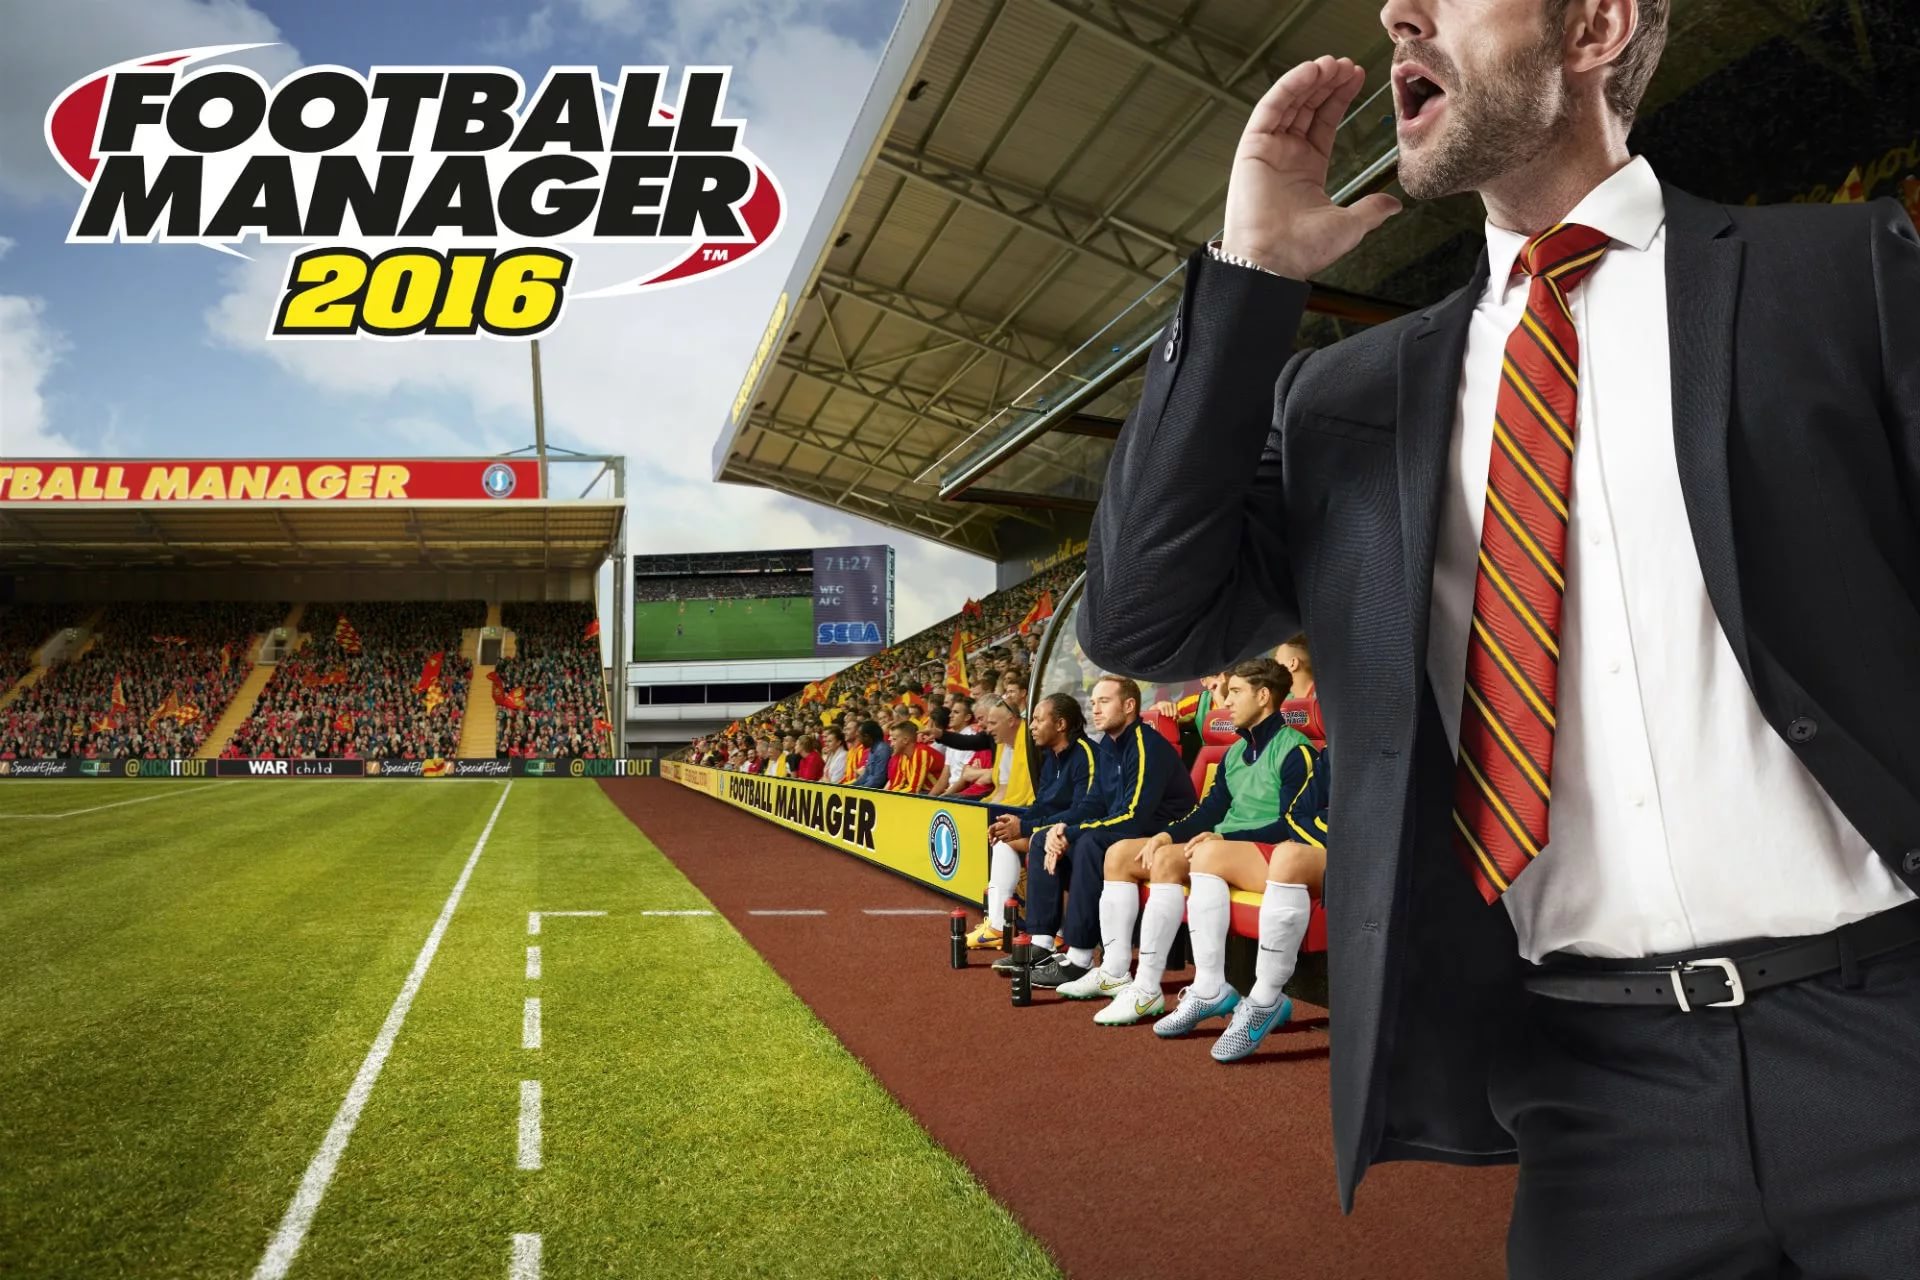 Football managers games. Футбол менеджер. Football Manager 2016. Футбол меджеры. Футбольный менеджер 2016.